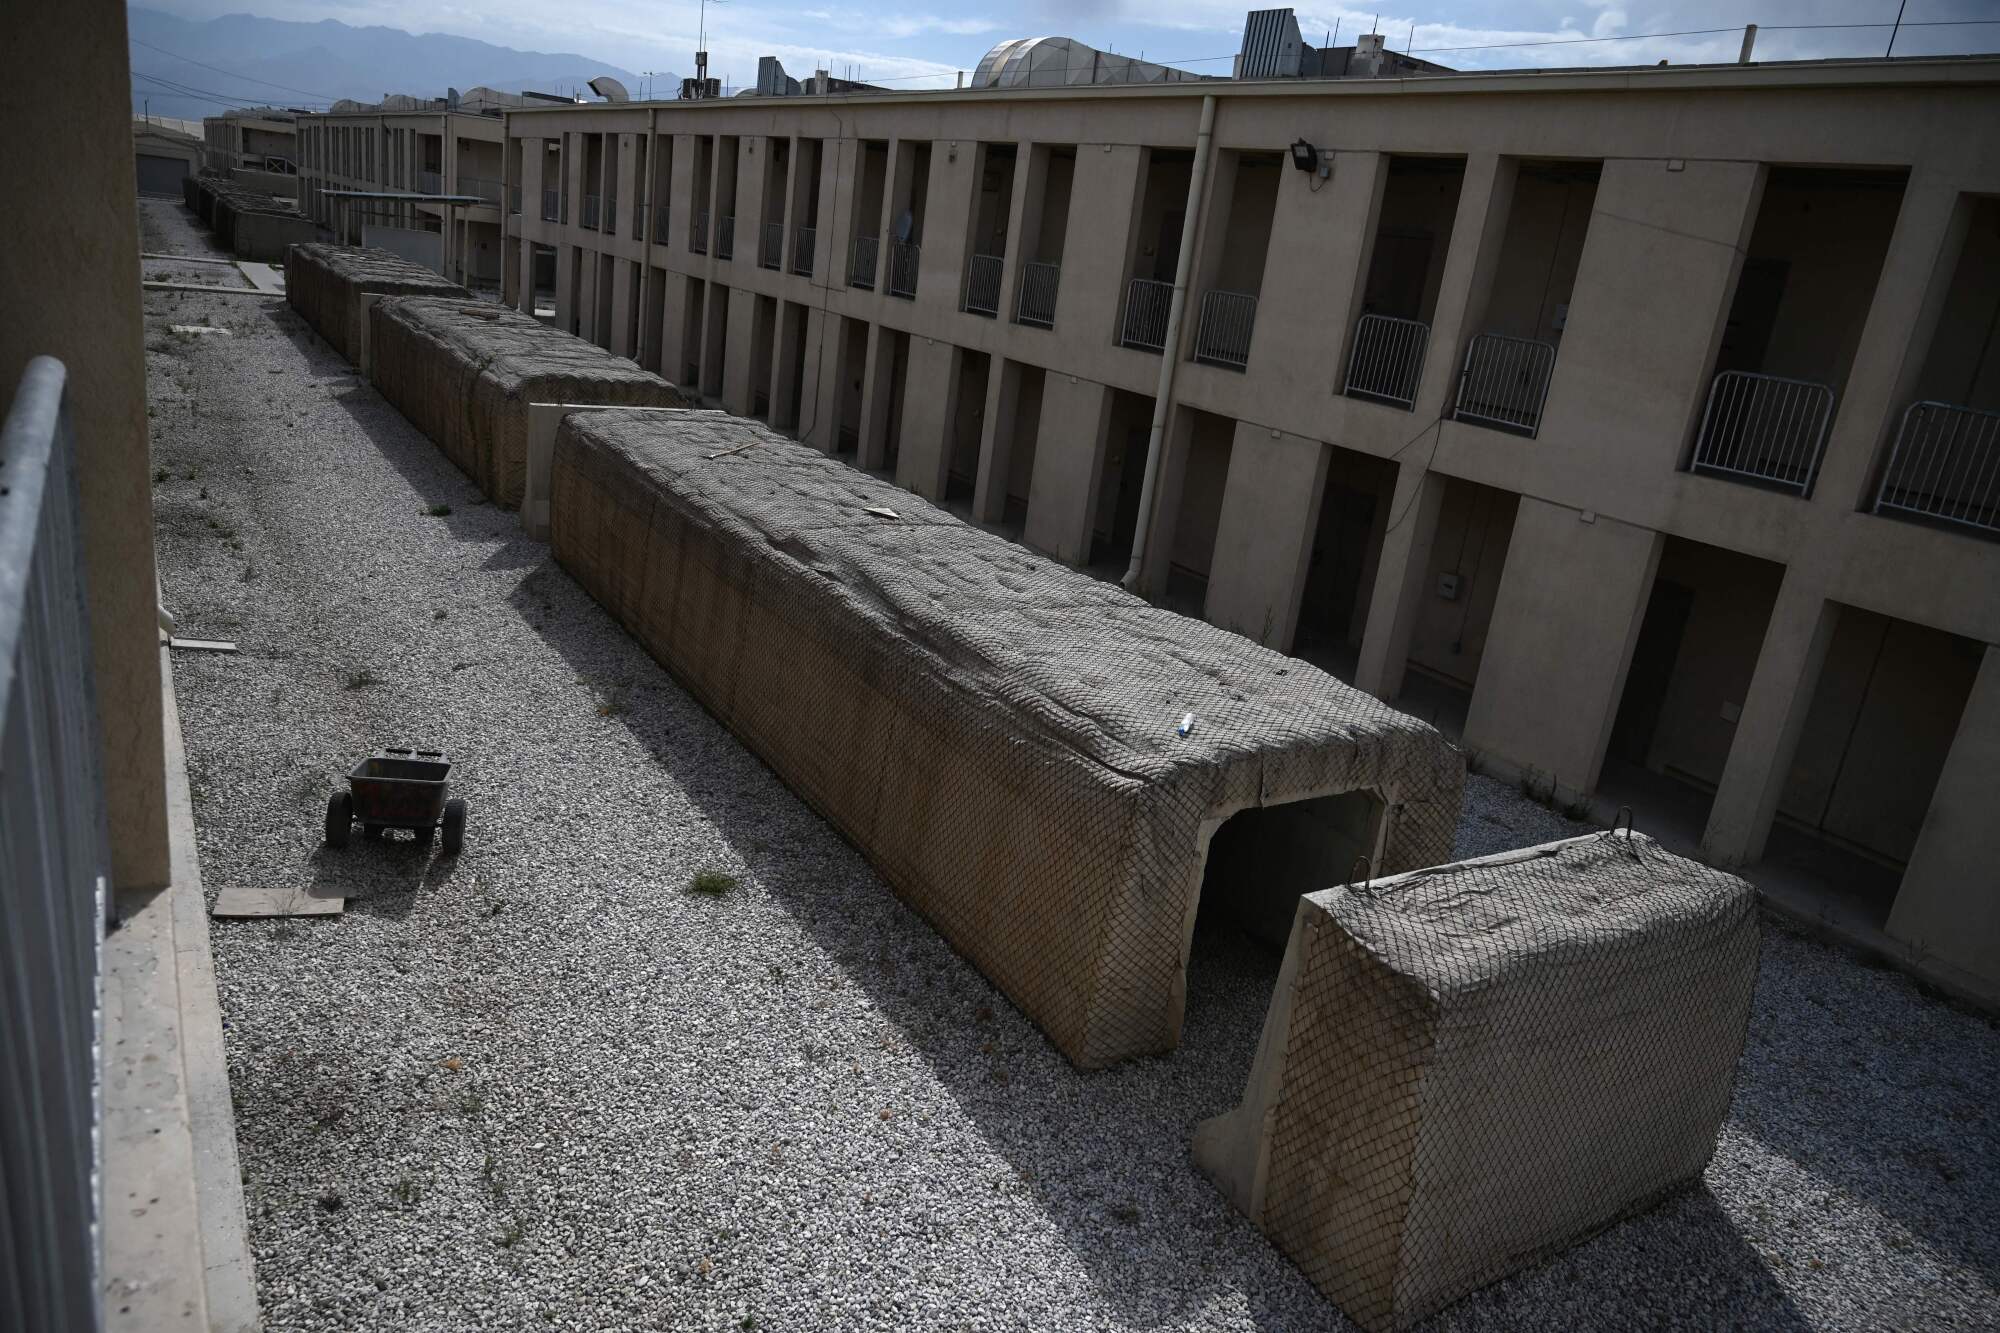 Safety bunkers inside the Bagram air base.